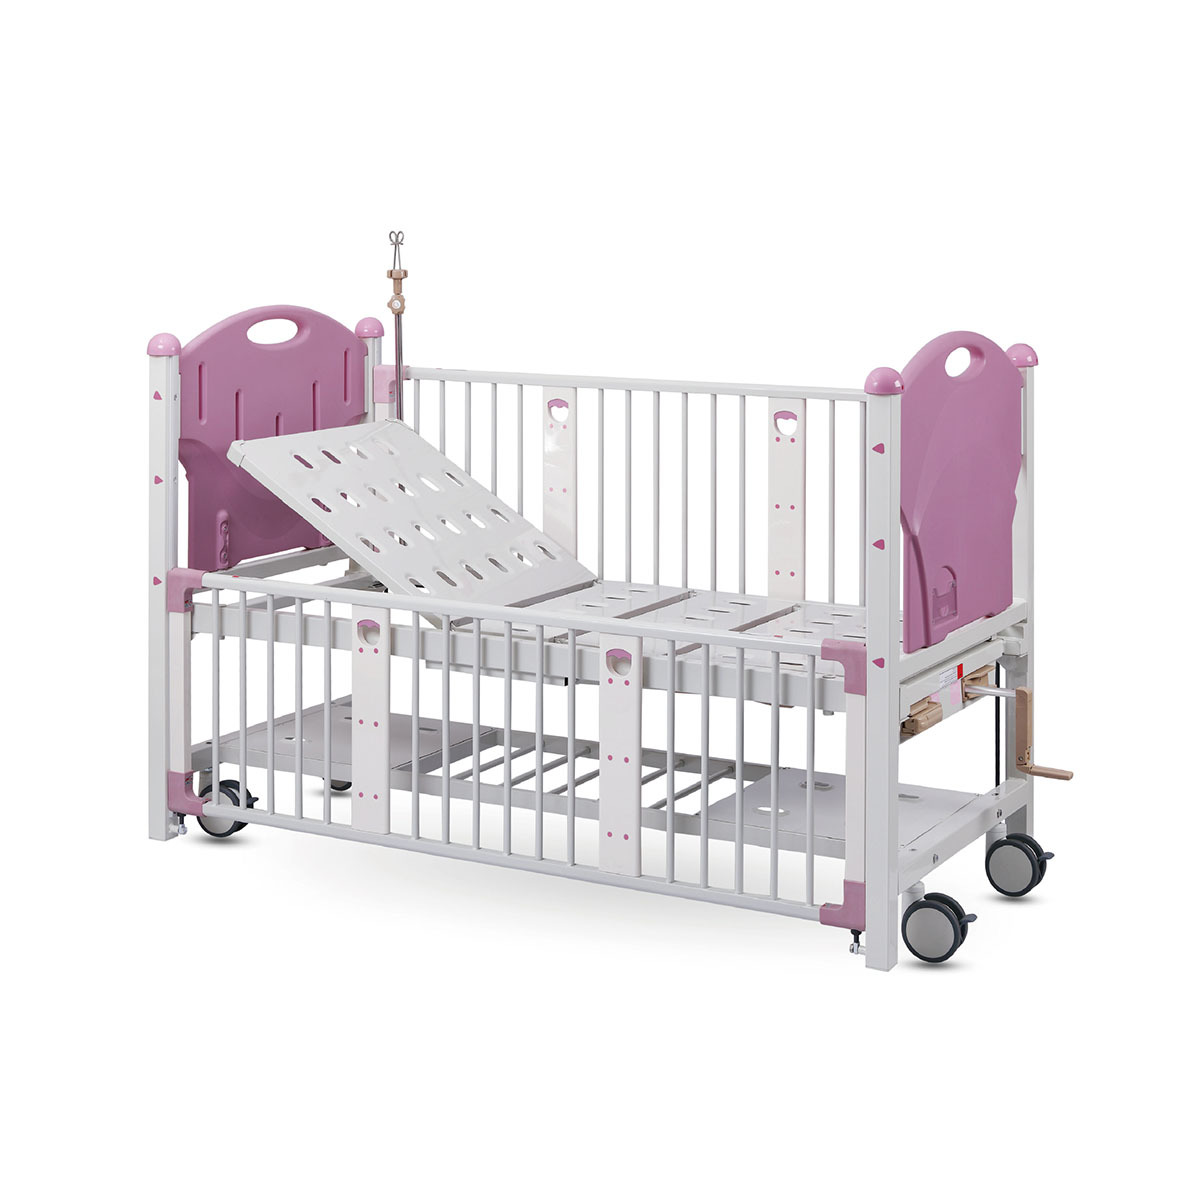 HL-A141A Paediatric bed